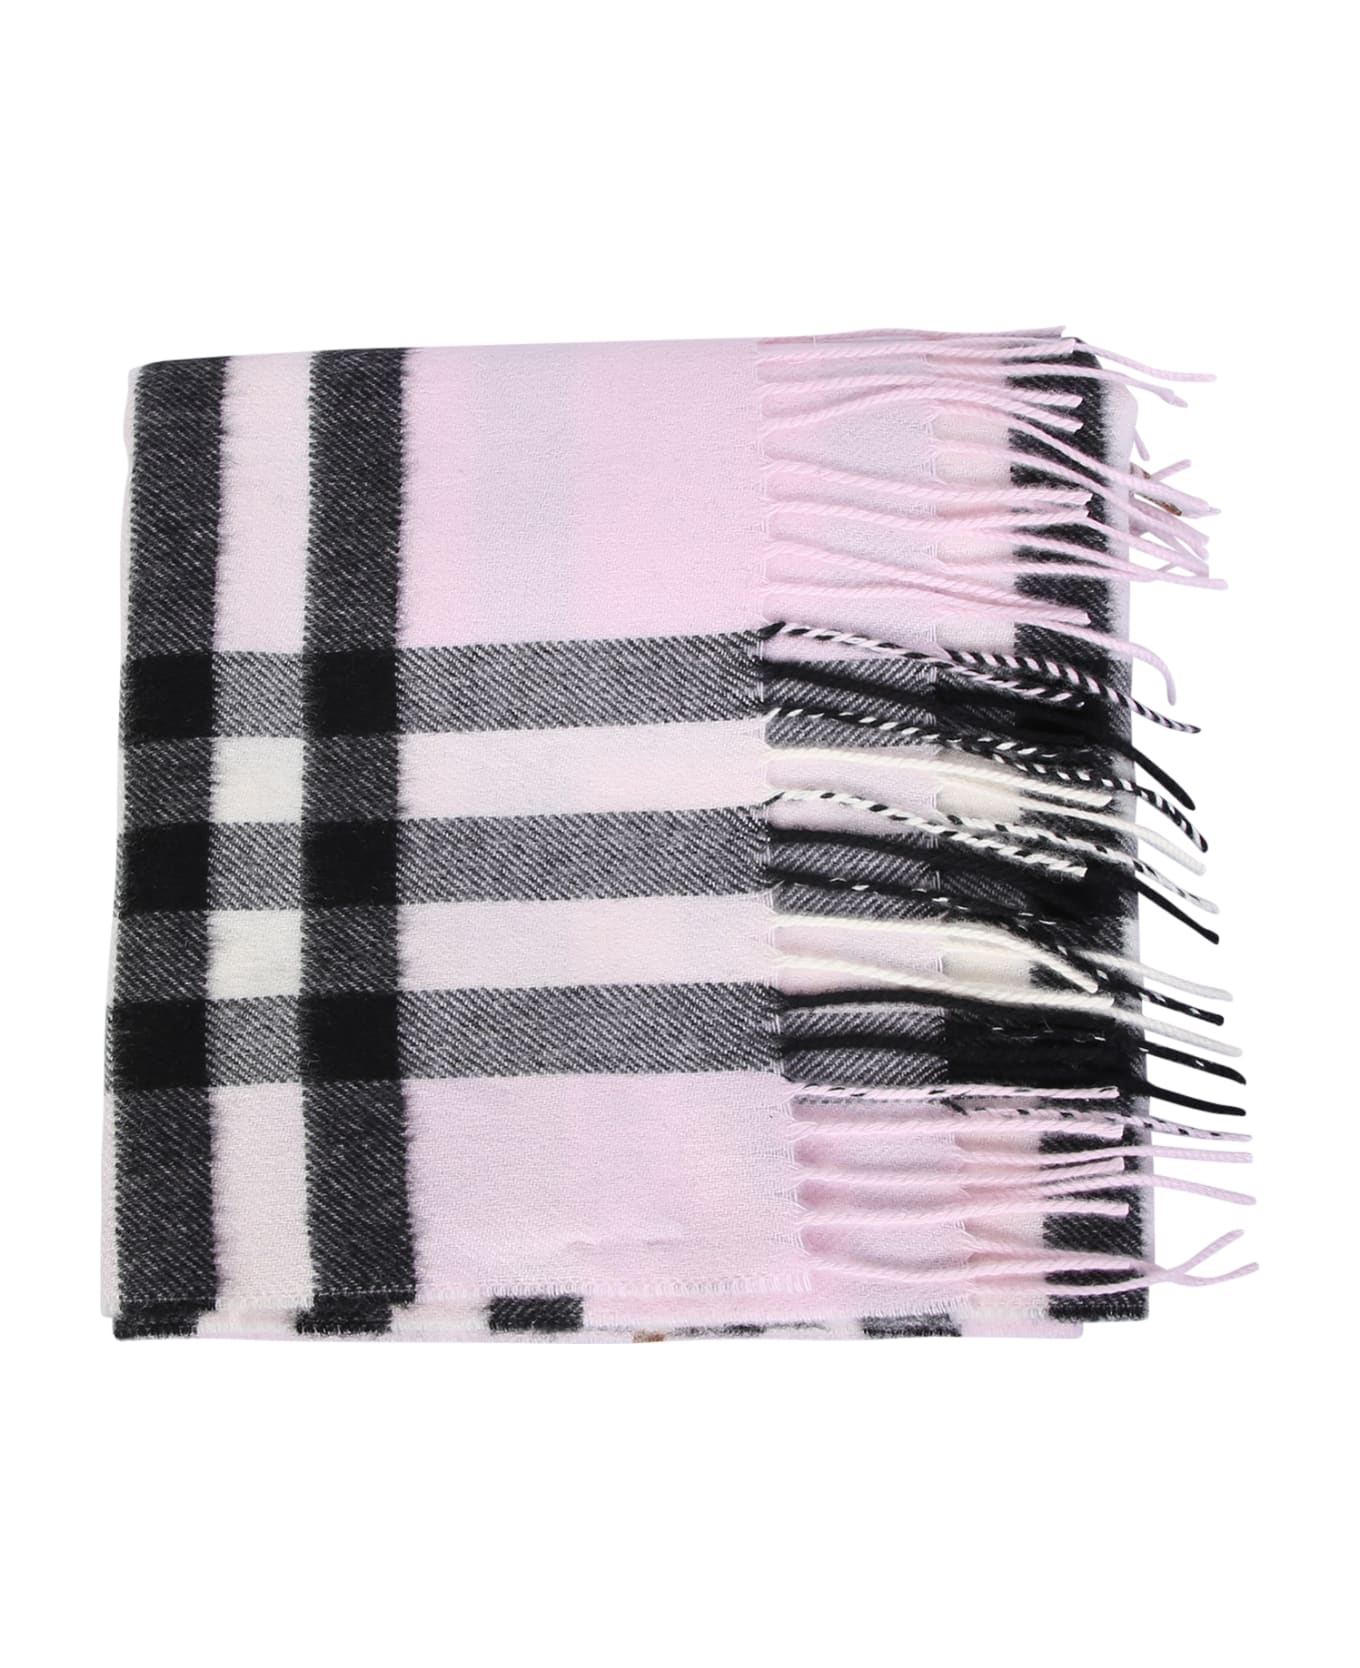 Burberry Giant Check Scarf - Pink スカーフ